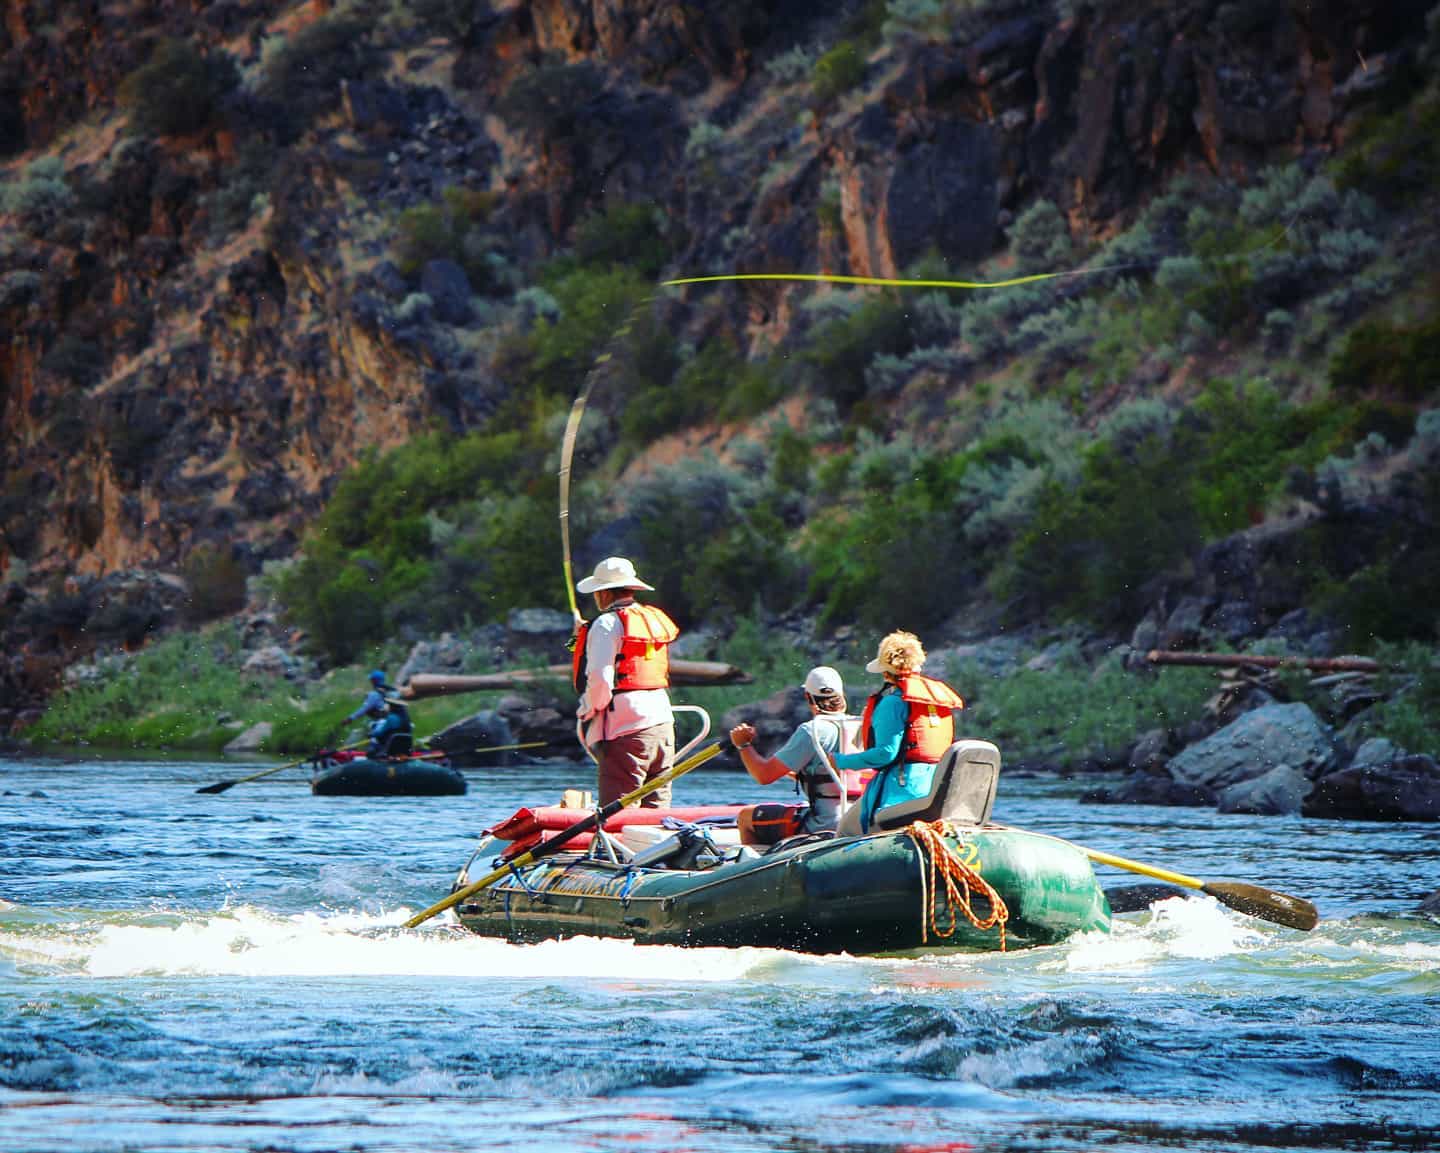 A fly fisherman casts into the Middle Fork of the Salmon River from atop a raft.